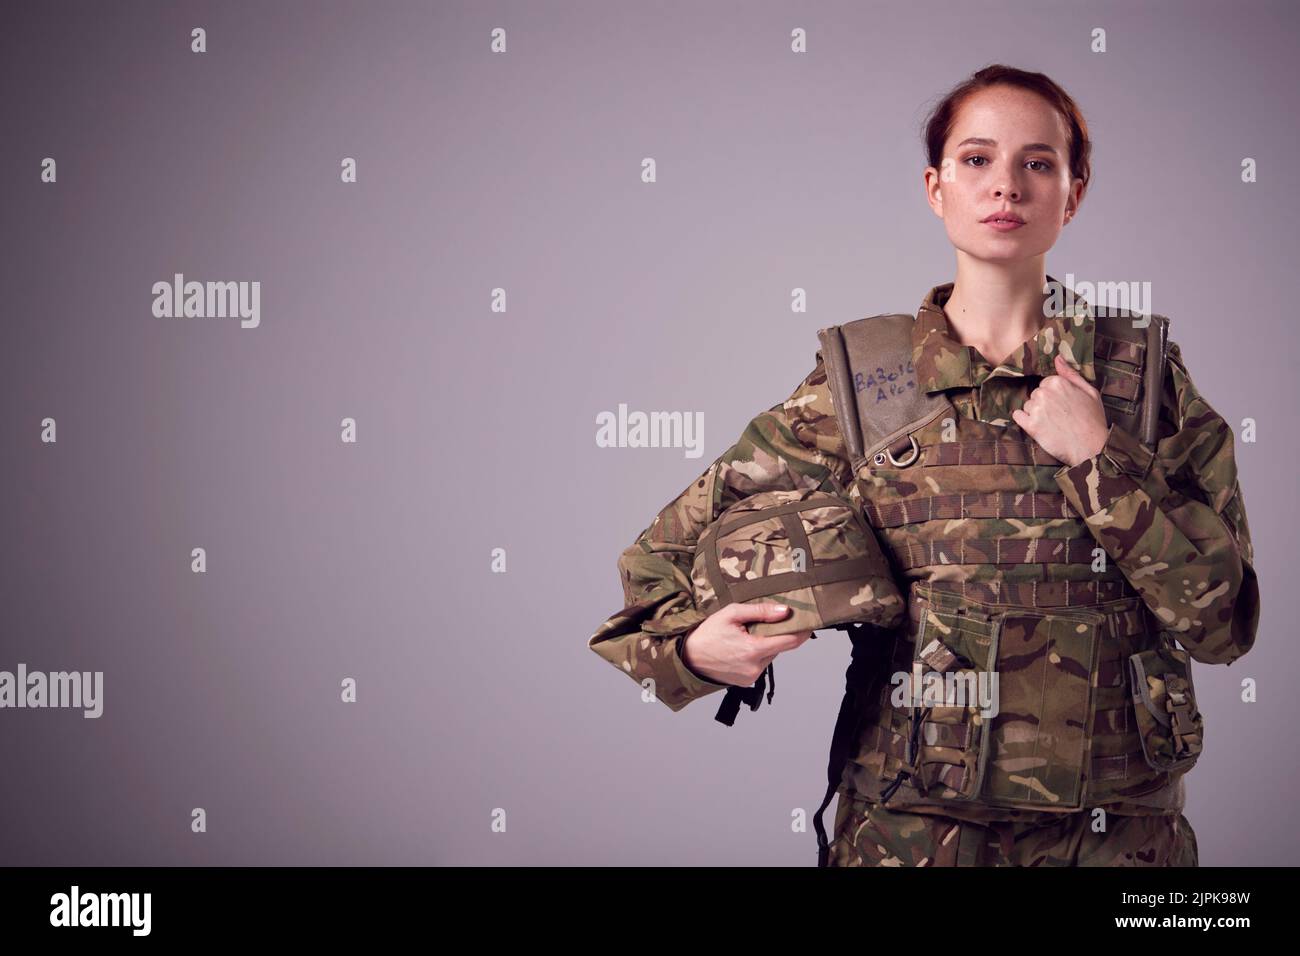 military, soldier, army, camouflage clothing, berufsporträt, militaries, troops, soldiers, armies Stock Photo